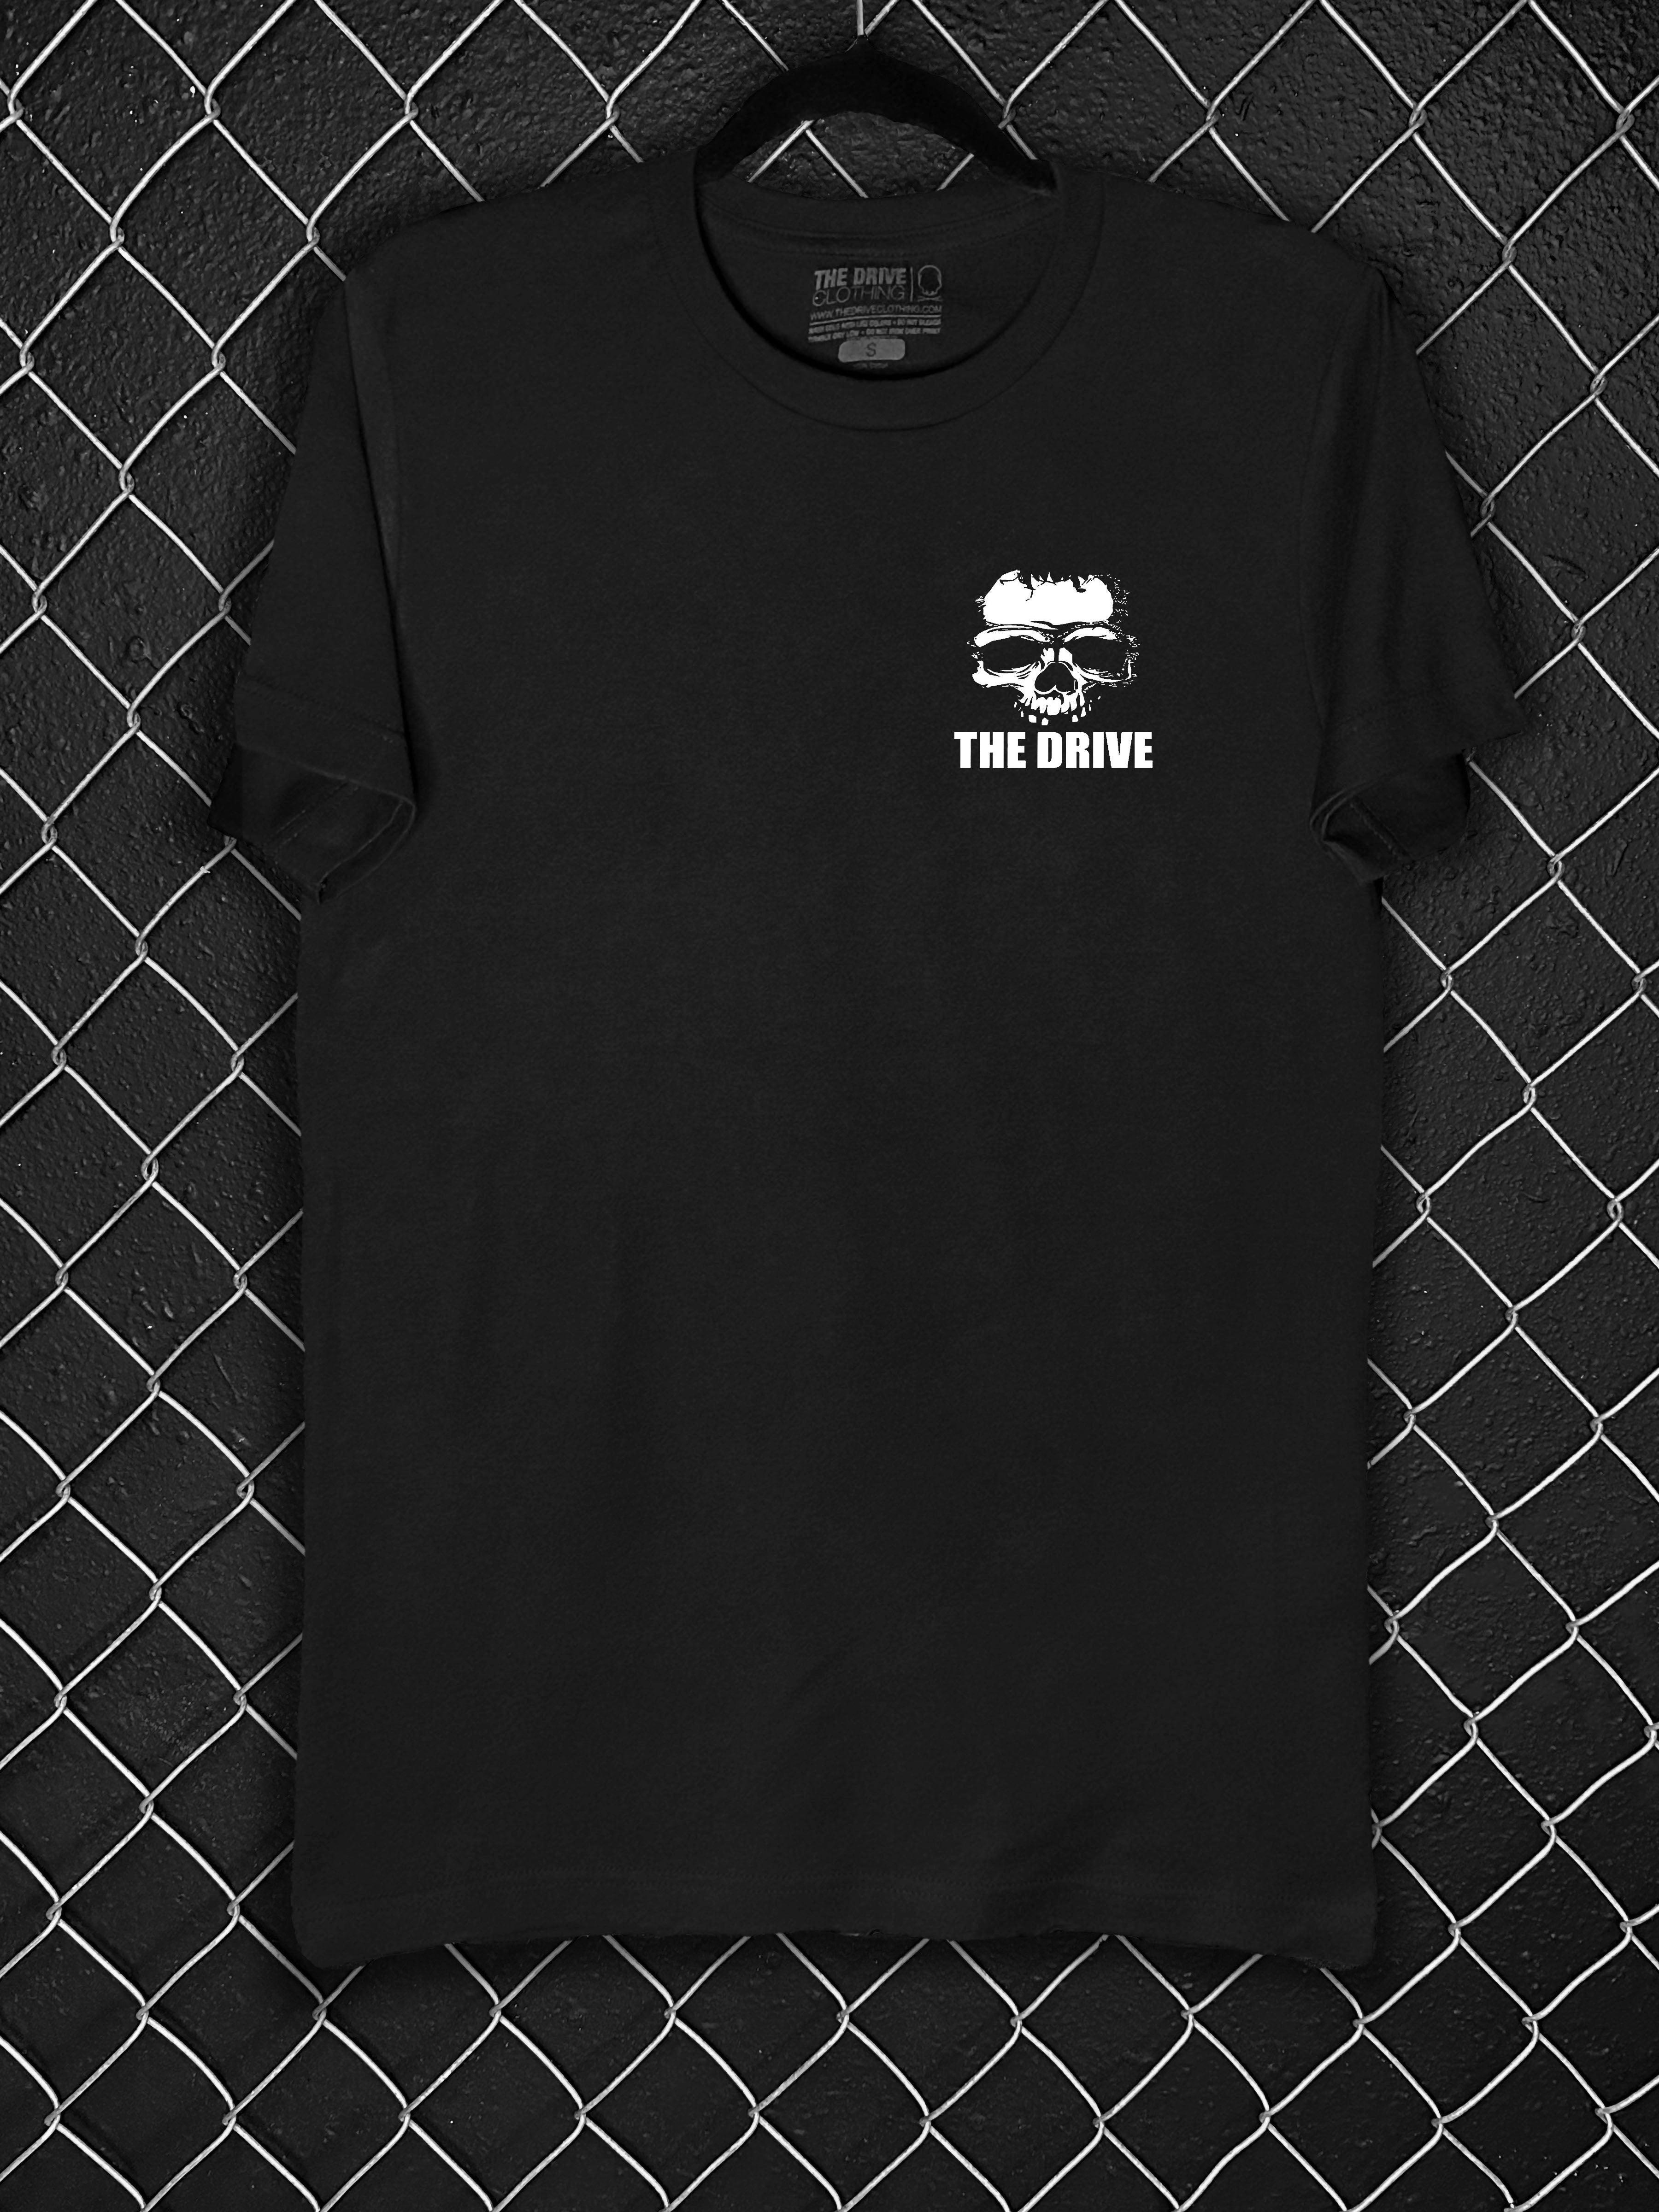 DOIN SHIT MY WAY CLASSIC TEE - The Drive Clothing